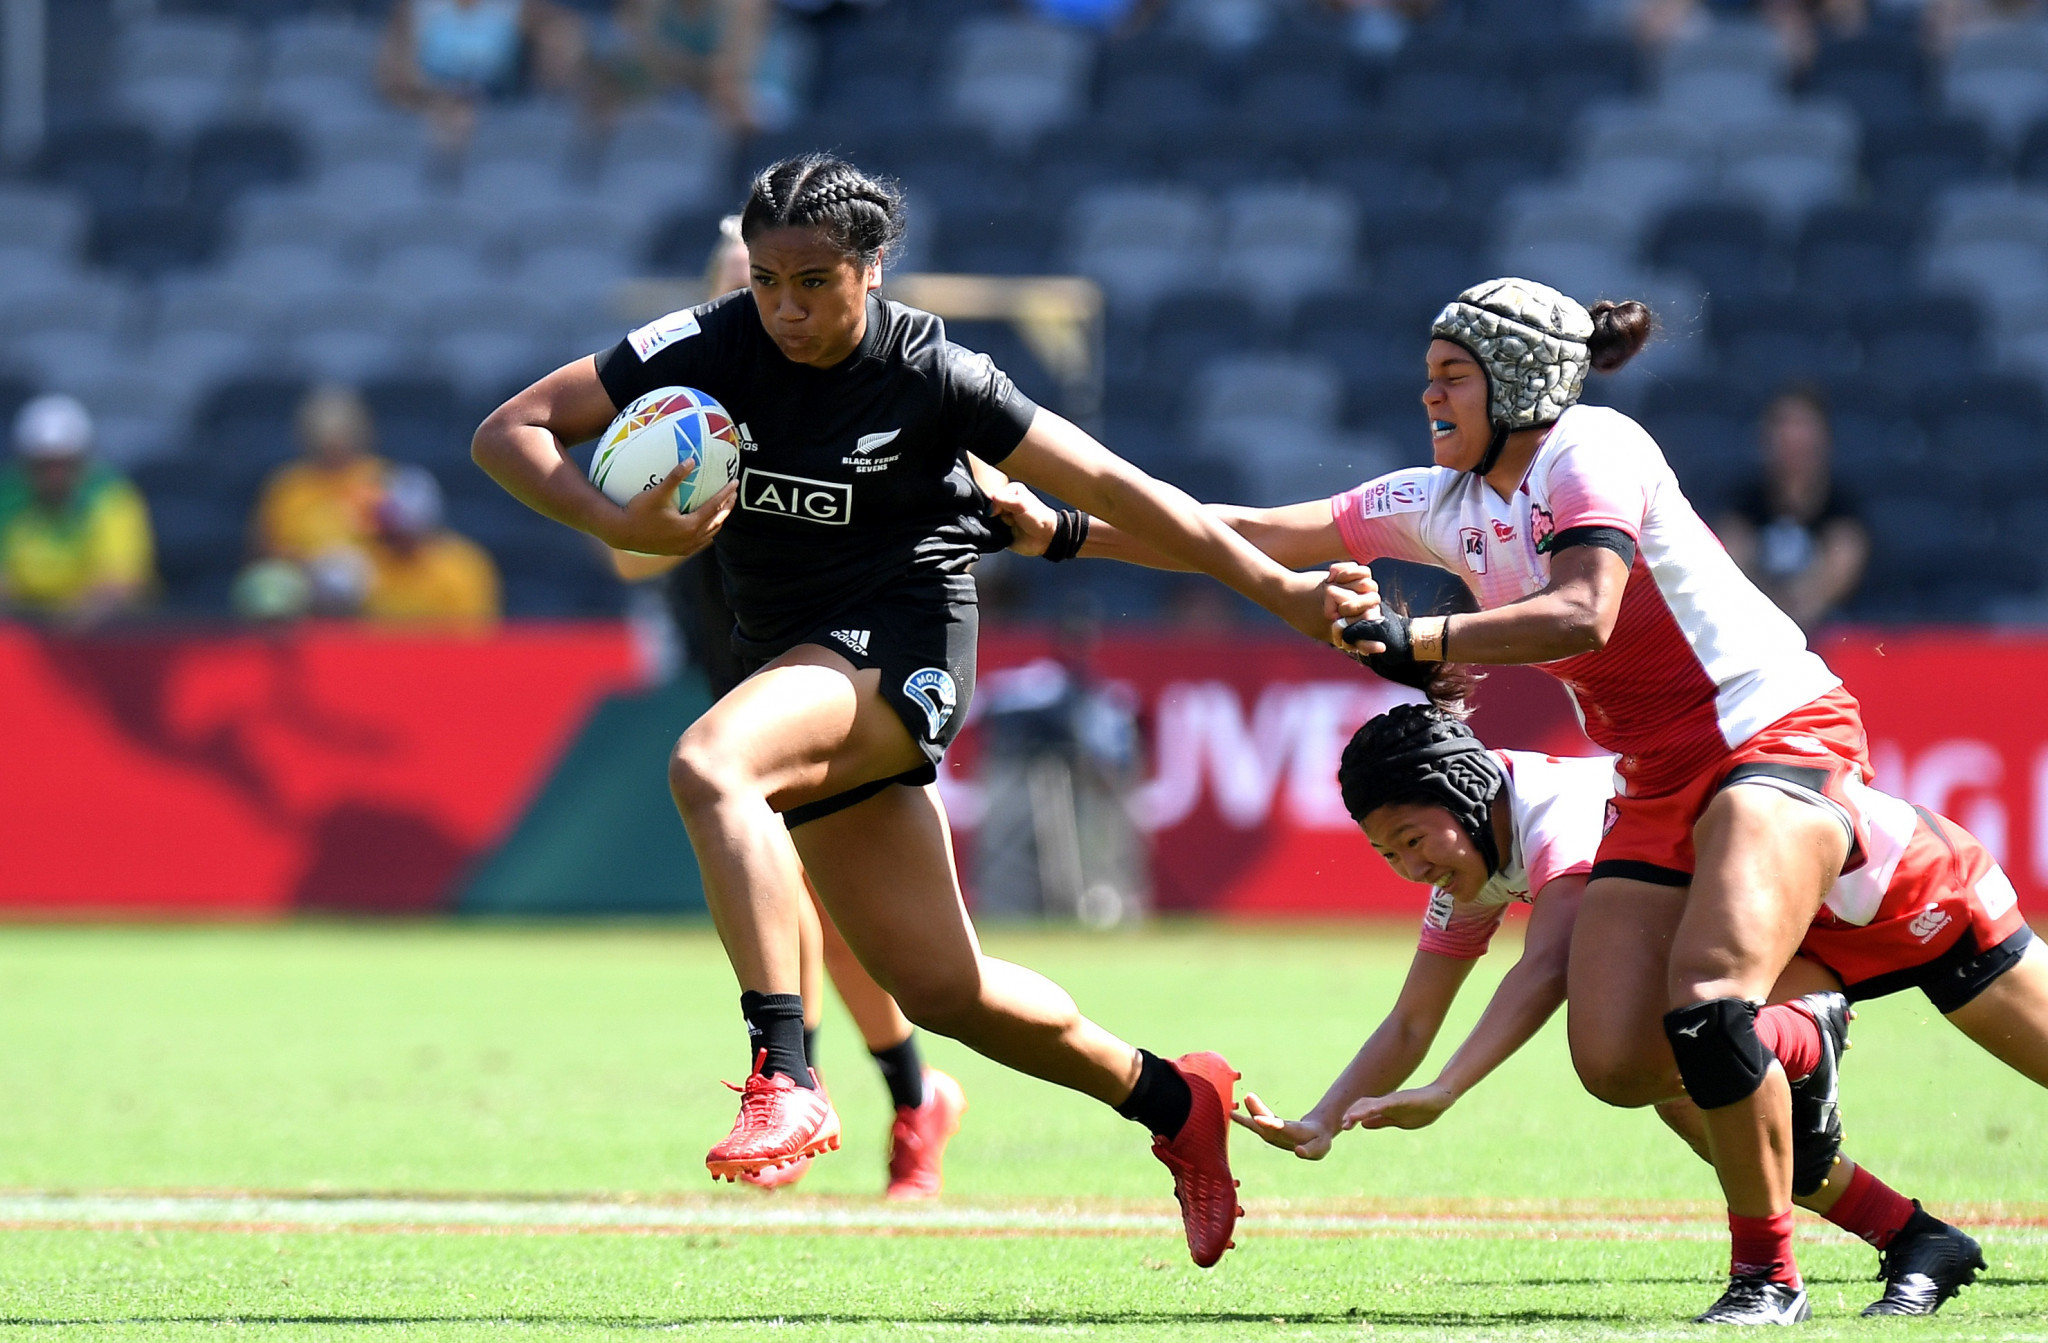 New Zealand fightback to win women’s World Rugby Sevens Series in Toulouse